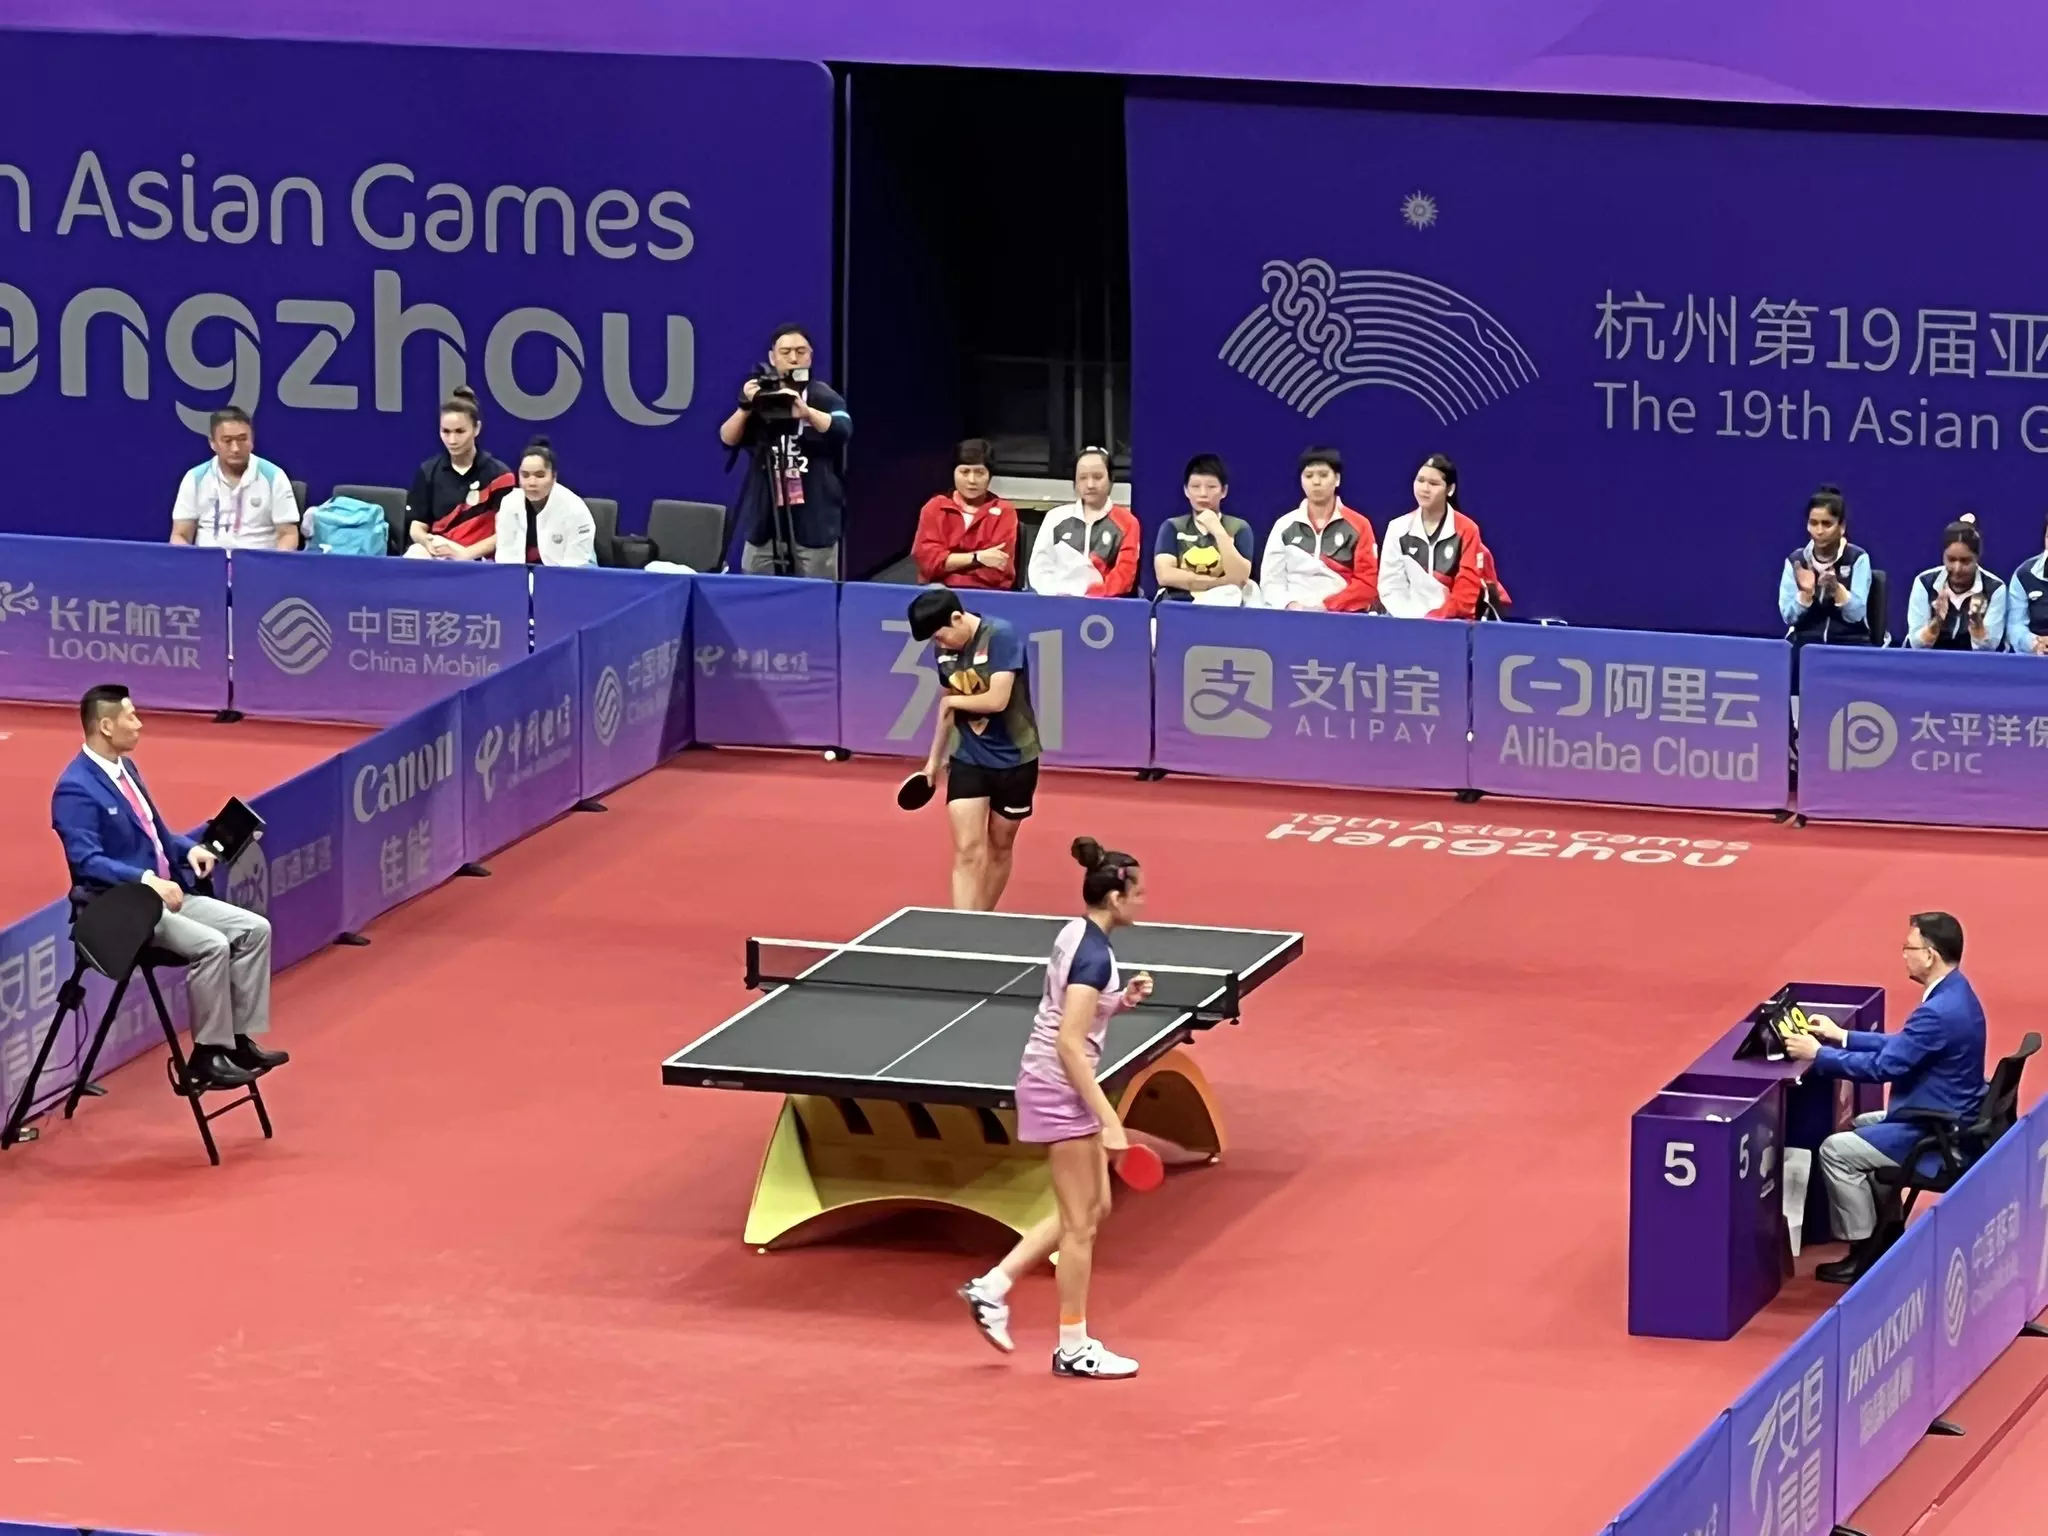 Asian Games Table Tennis Womens doubles medal confirmed- Updates, Scores, Results